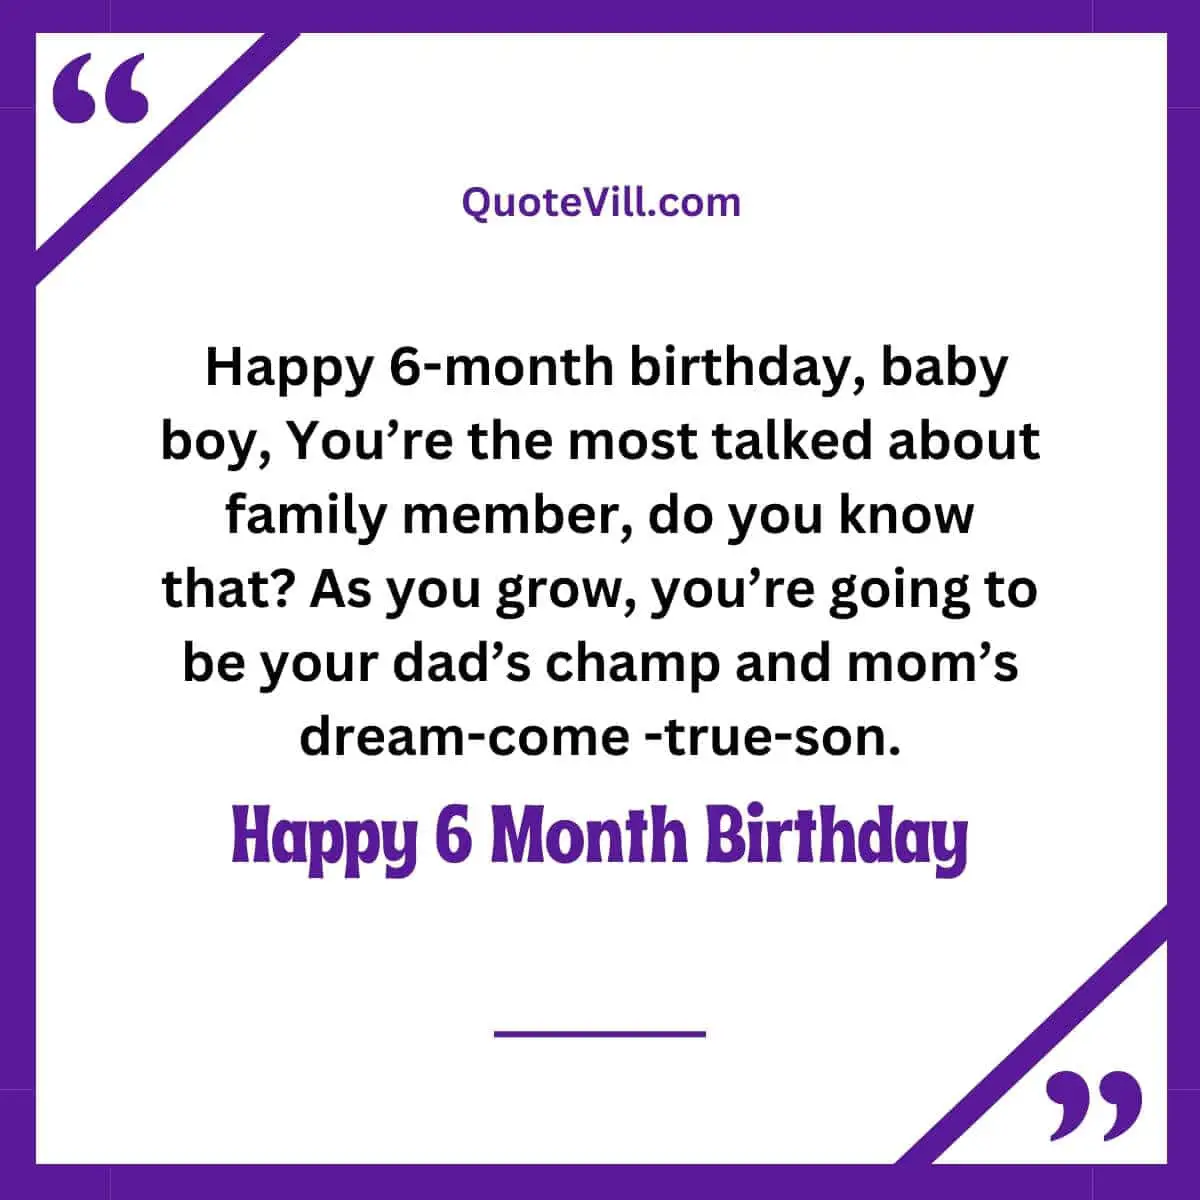 Birthday Messages For a 6-month-old